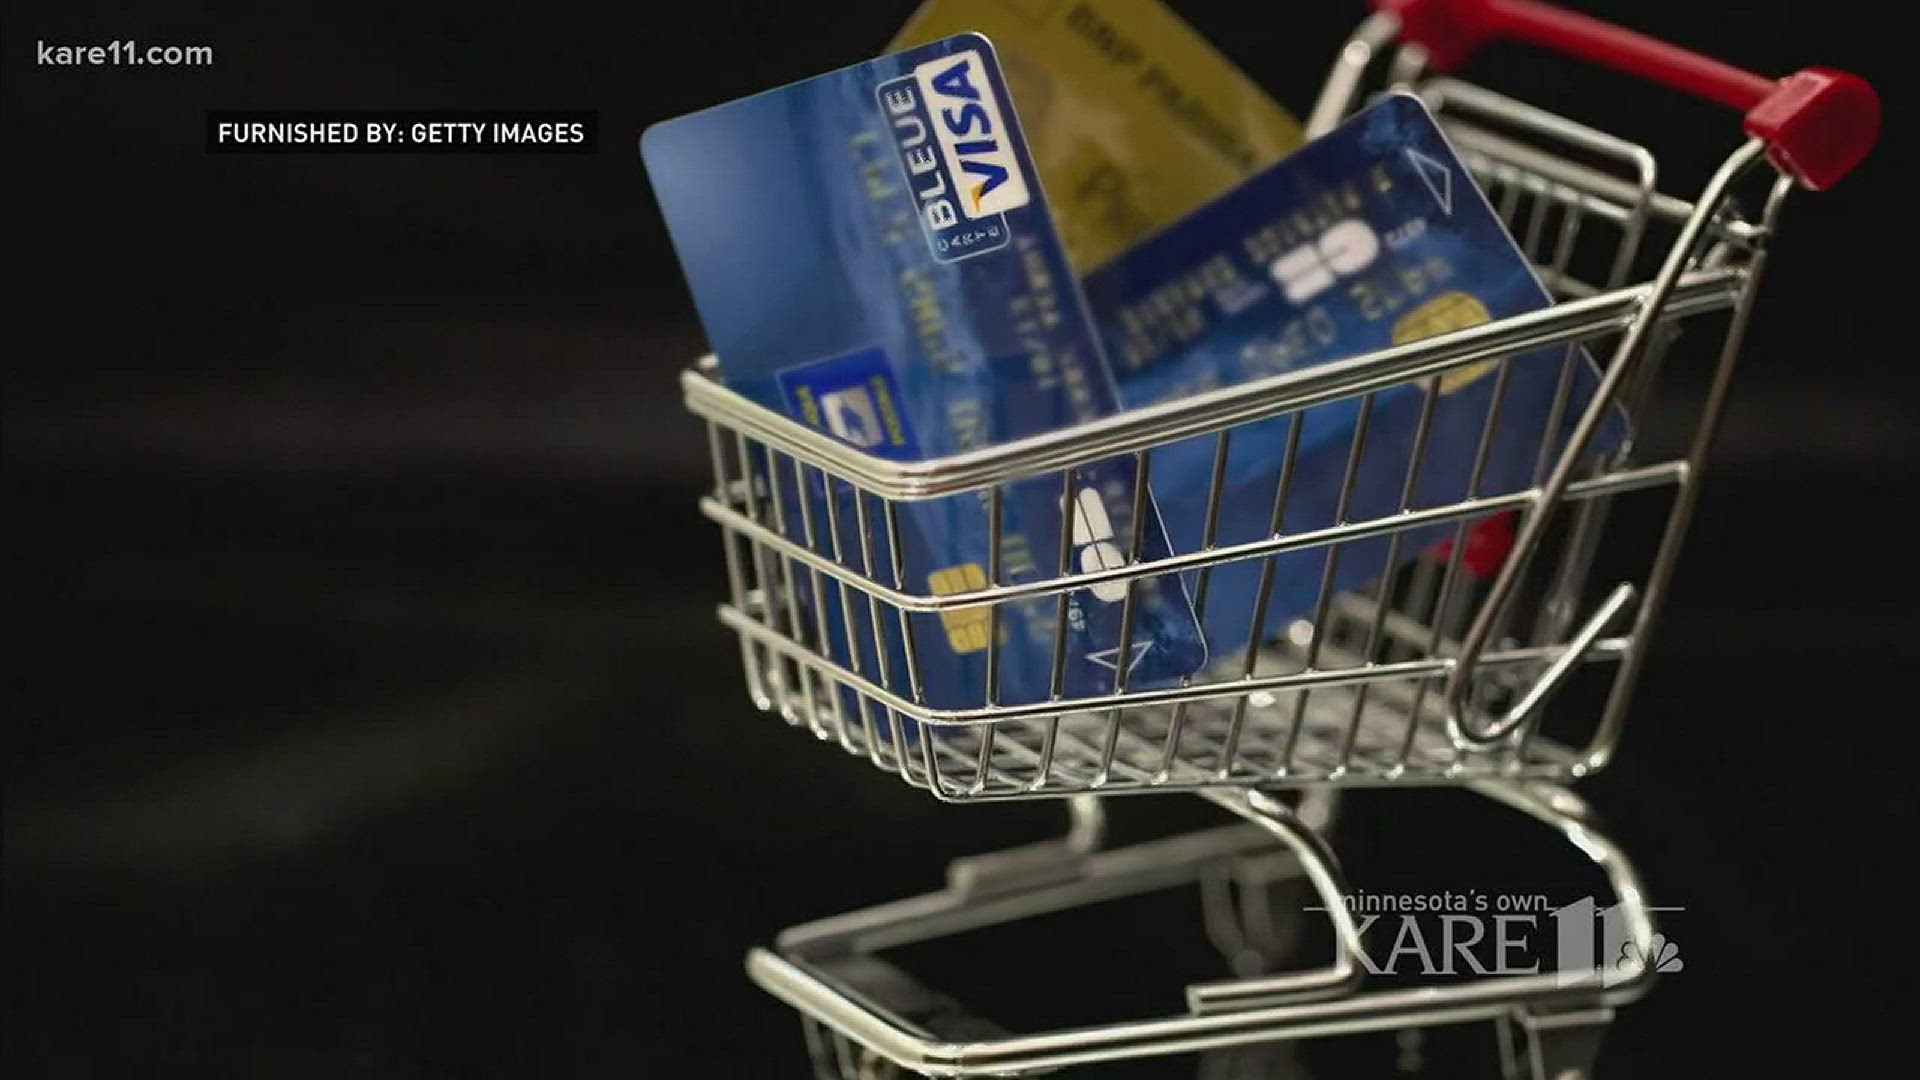 When you pay, you earn. Rewards like flights, hotels, even cash back. But are you using the best credit card for you? There's an app for that. http://kare11.tv/2jM3YzQ